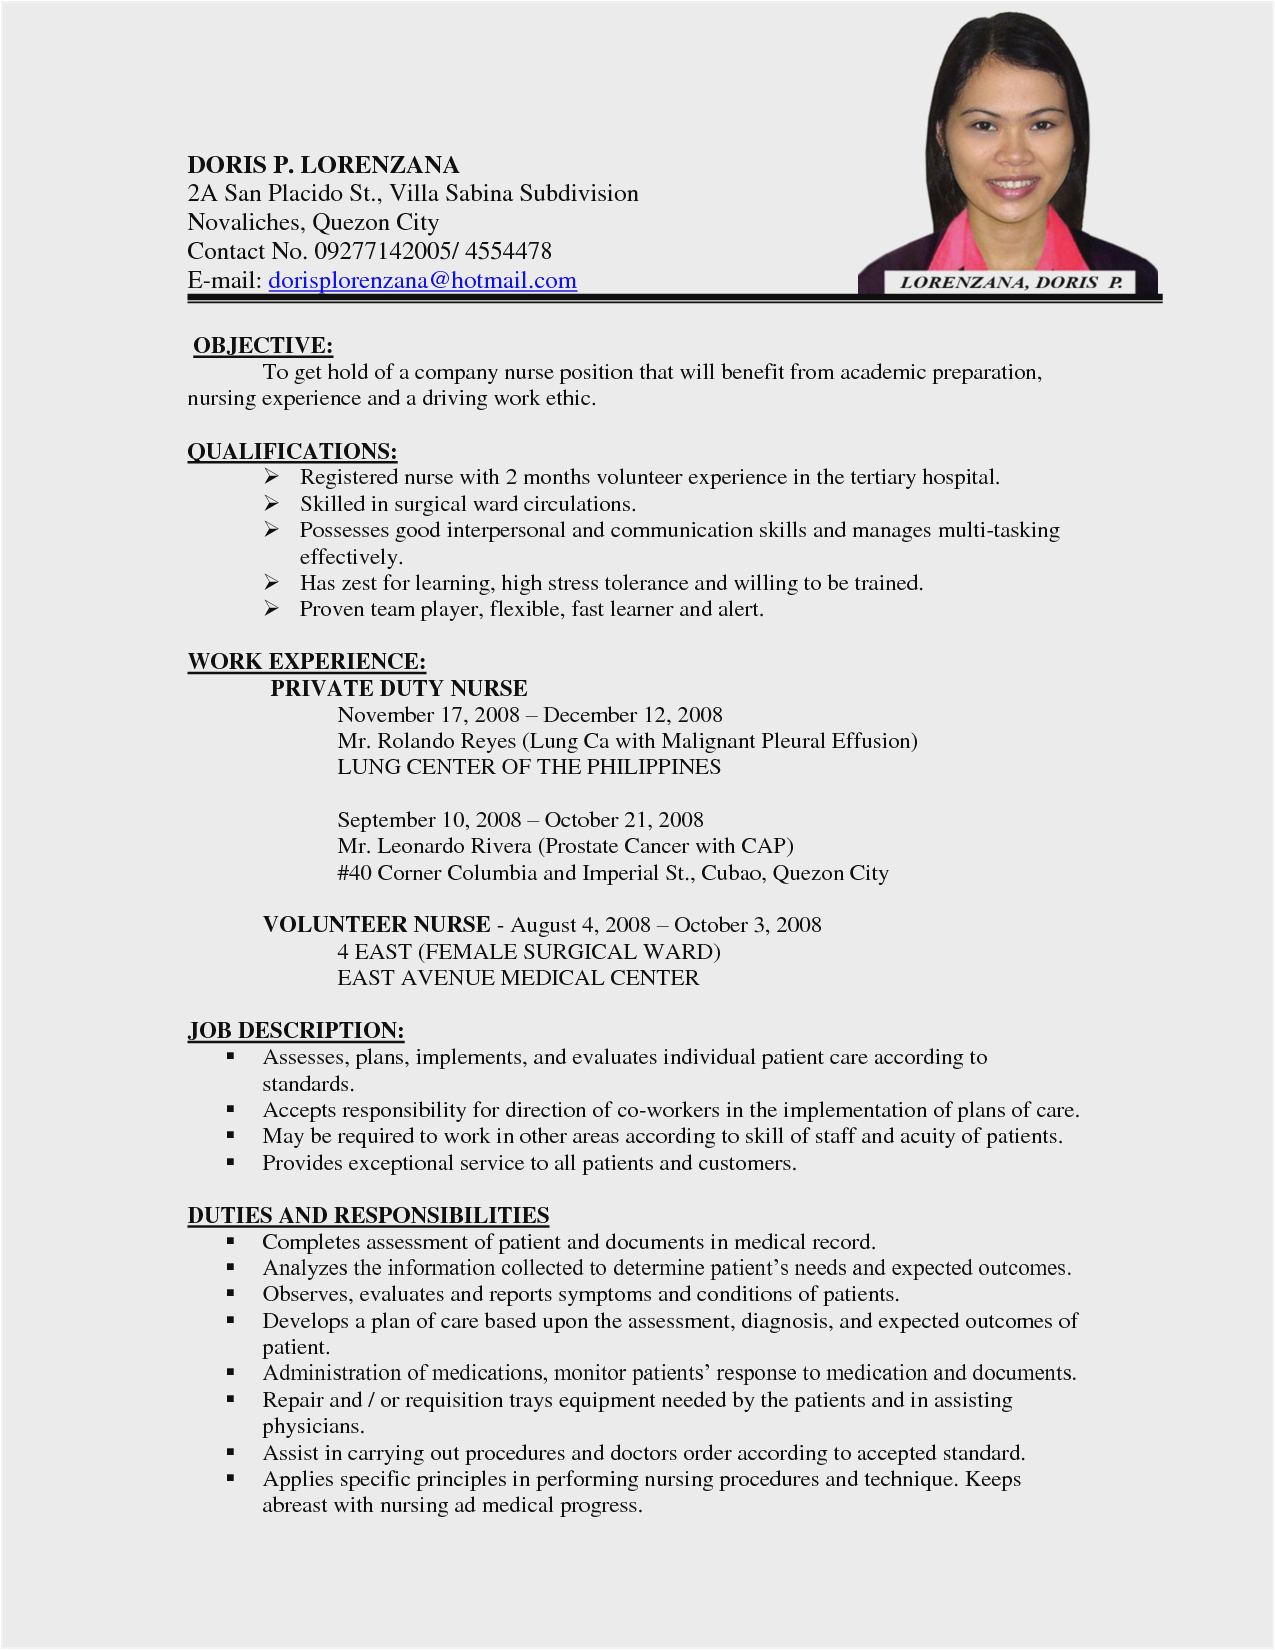 Sample Resume for Nurses with Experience In the Philippines Basic Resume In Philippines Best Resume Examples